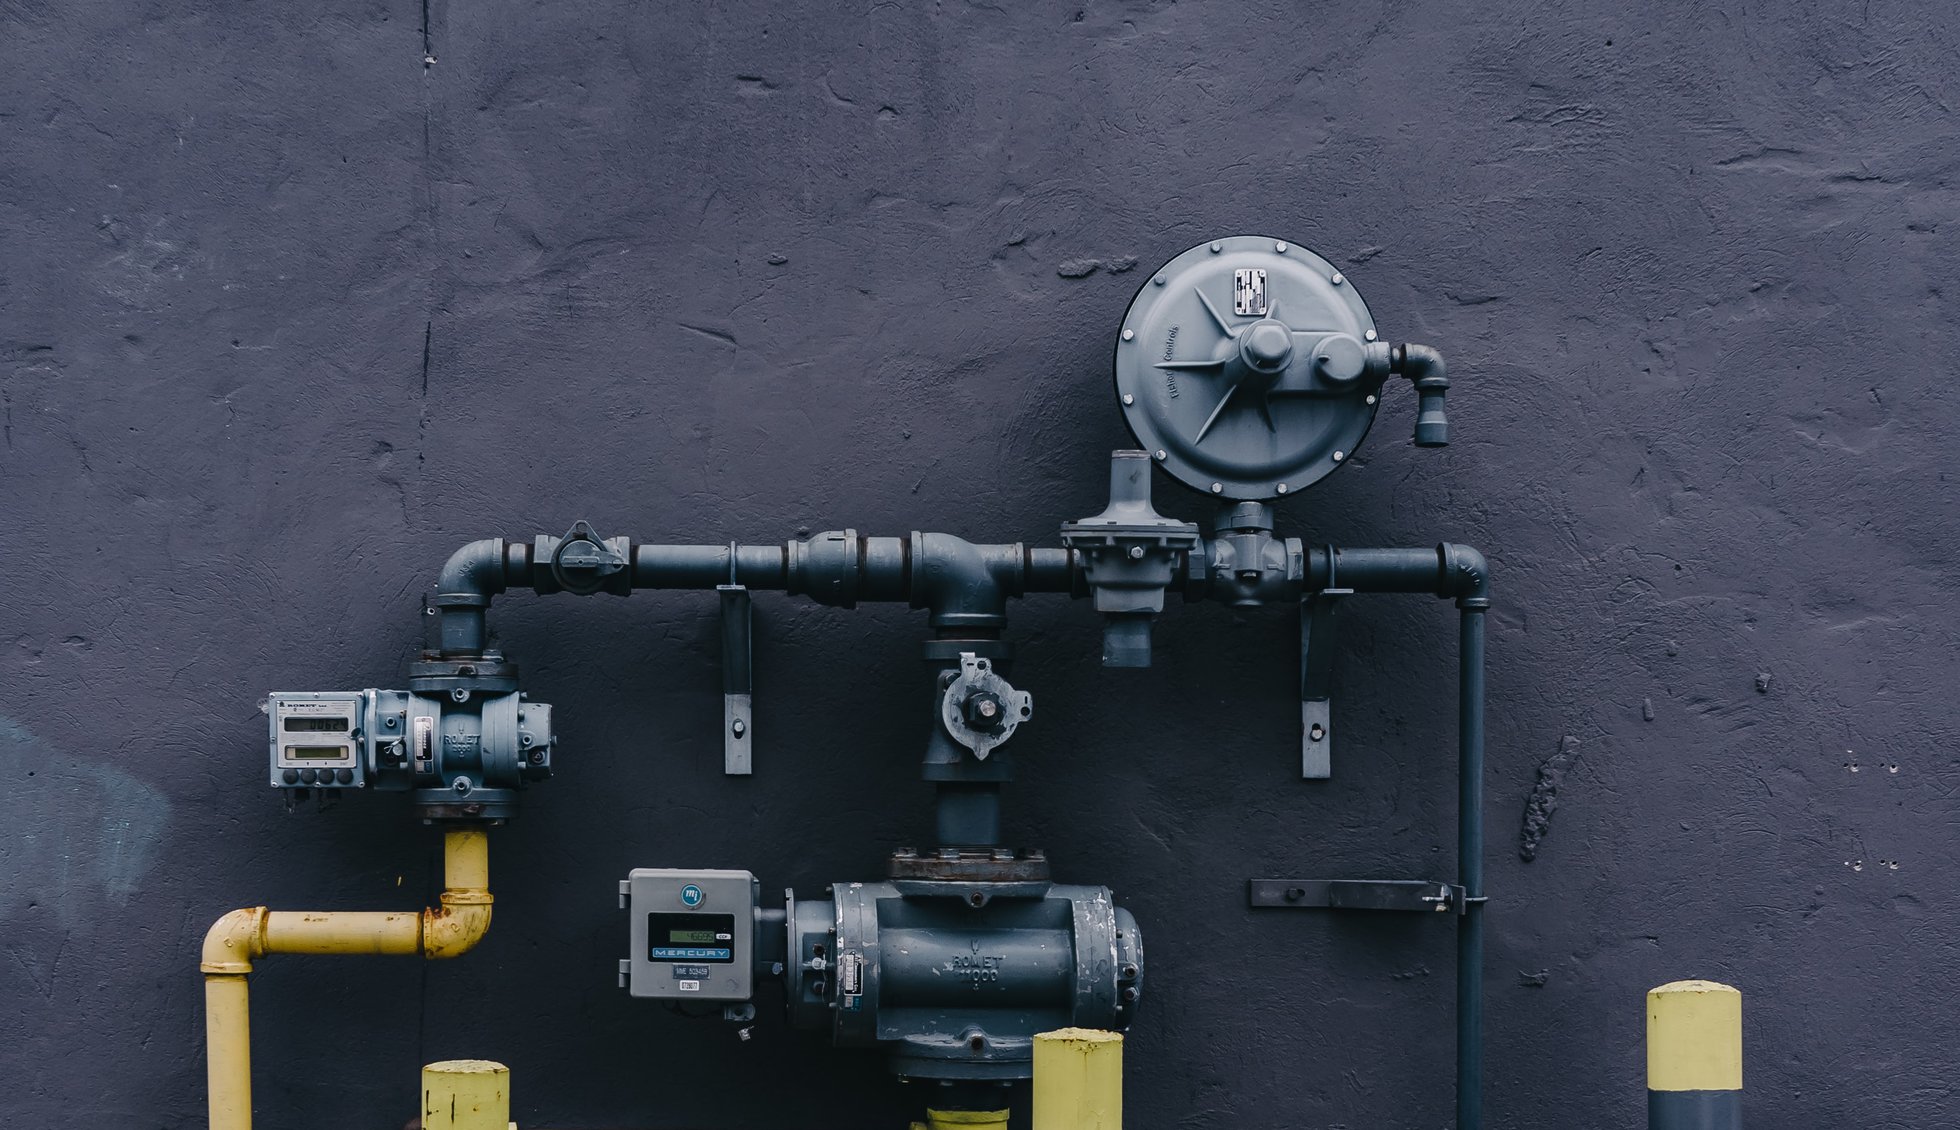 Connecting the world, one data source at a time: new meter suppliers and data collectors supported by EnergyDeck